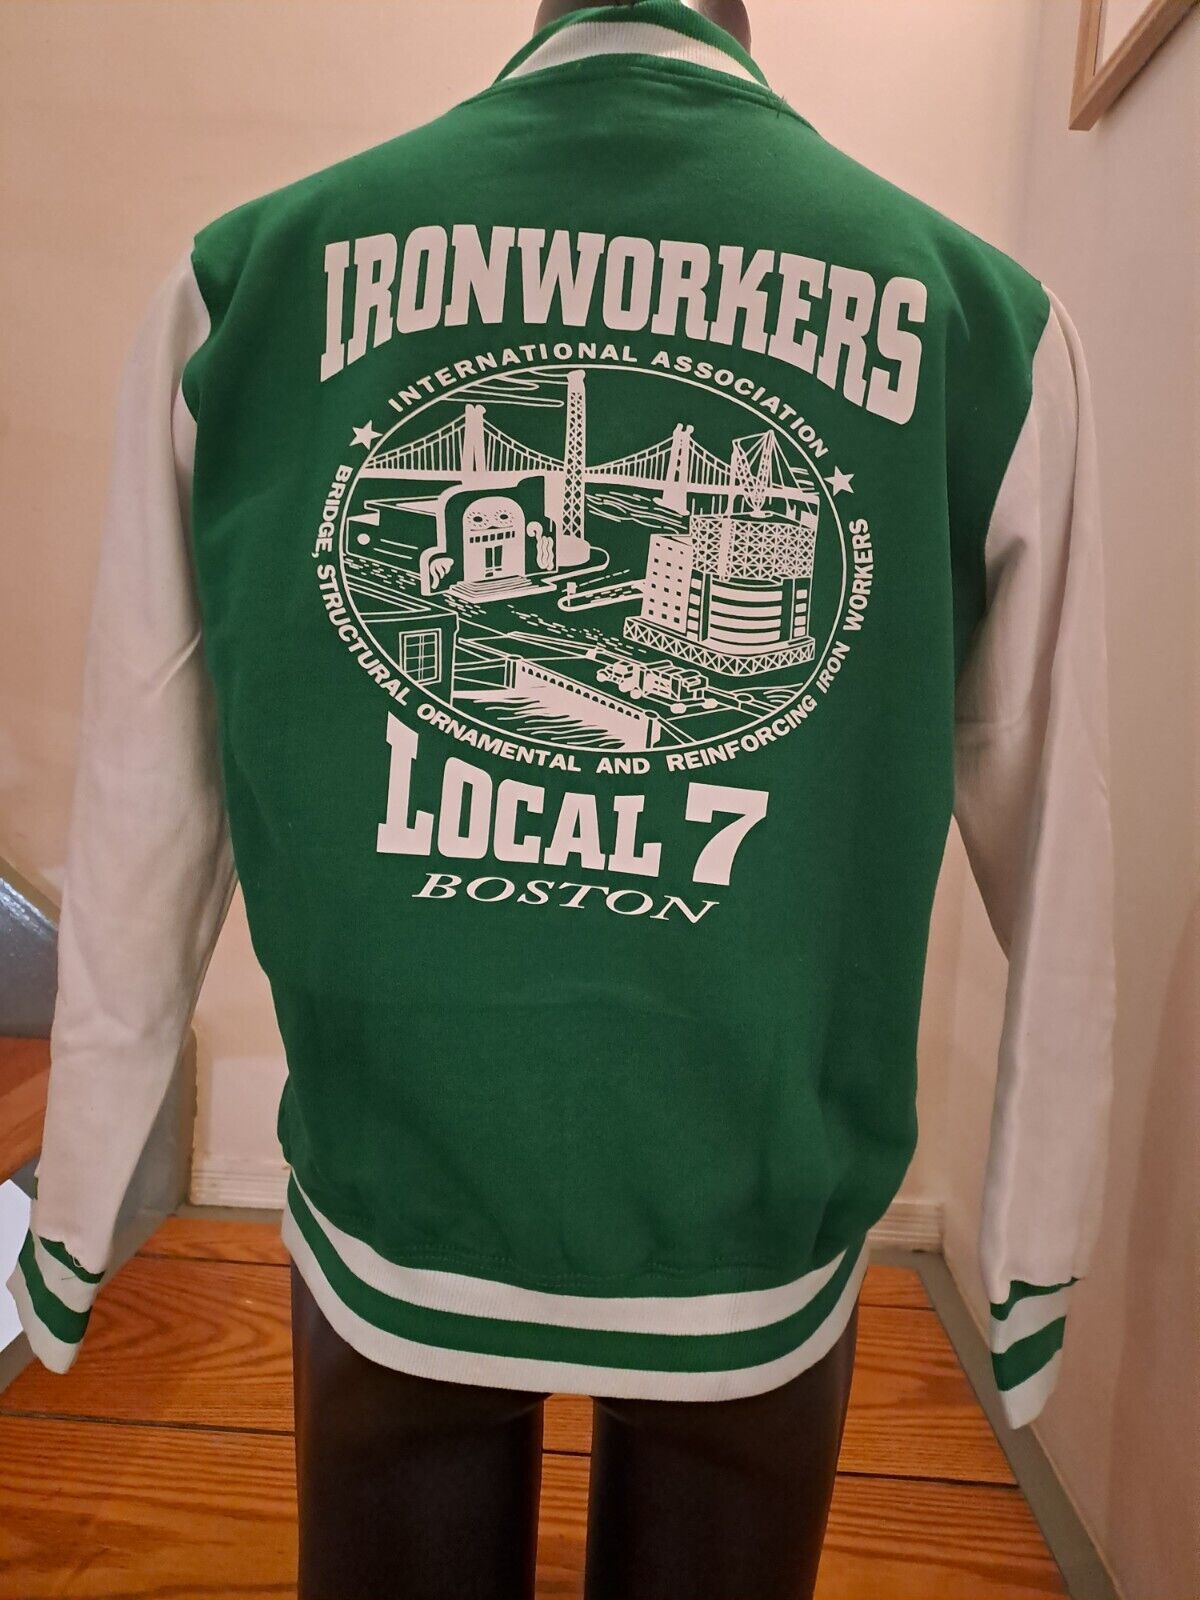  Ironworkers  Local 7 structural ornamental  Sport Top IronWorker  Sz M Boston 